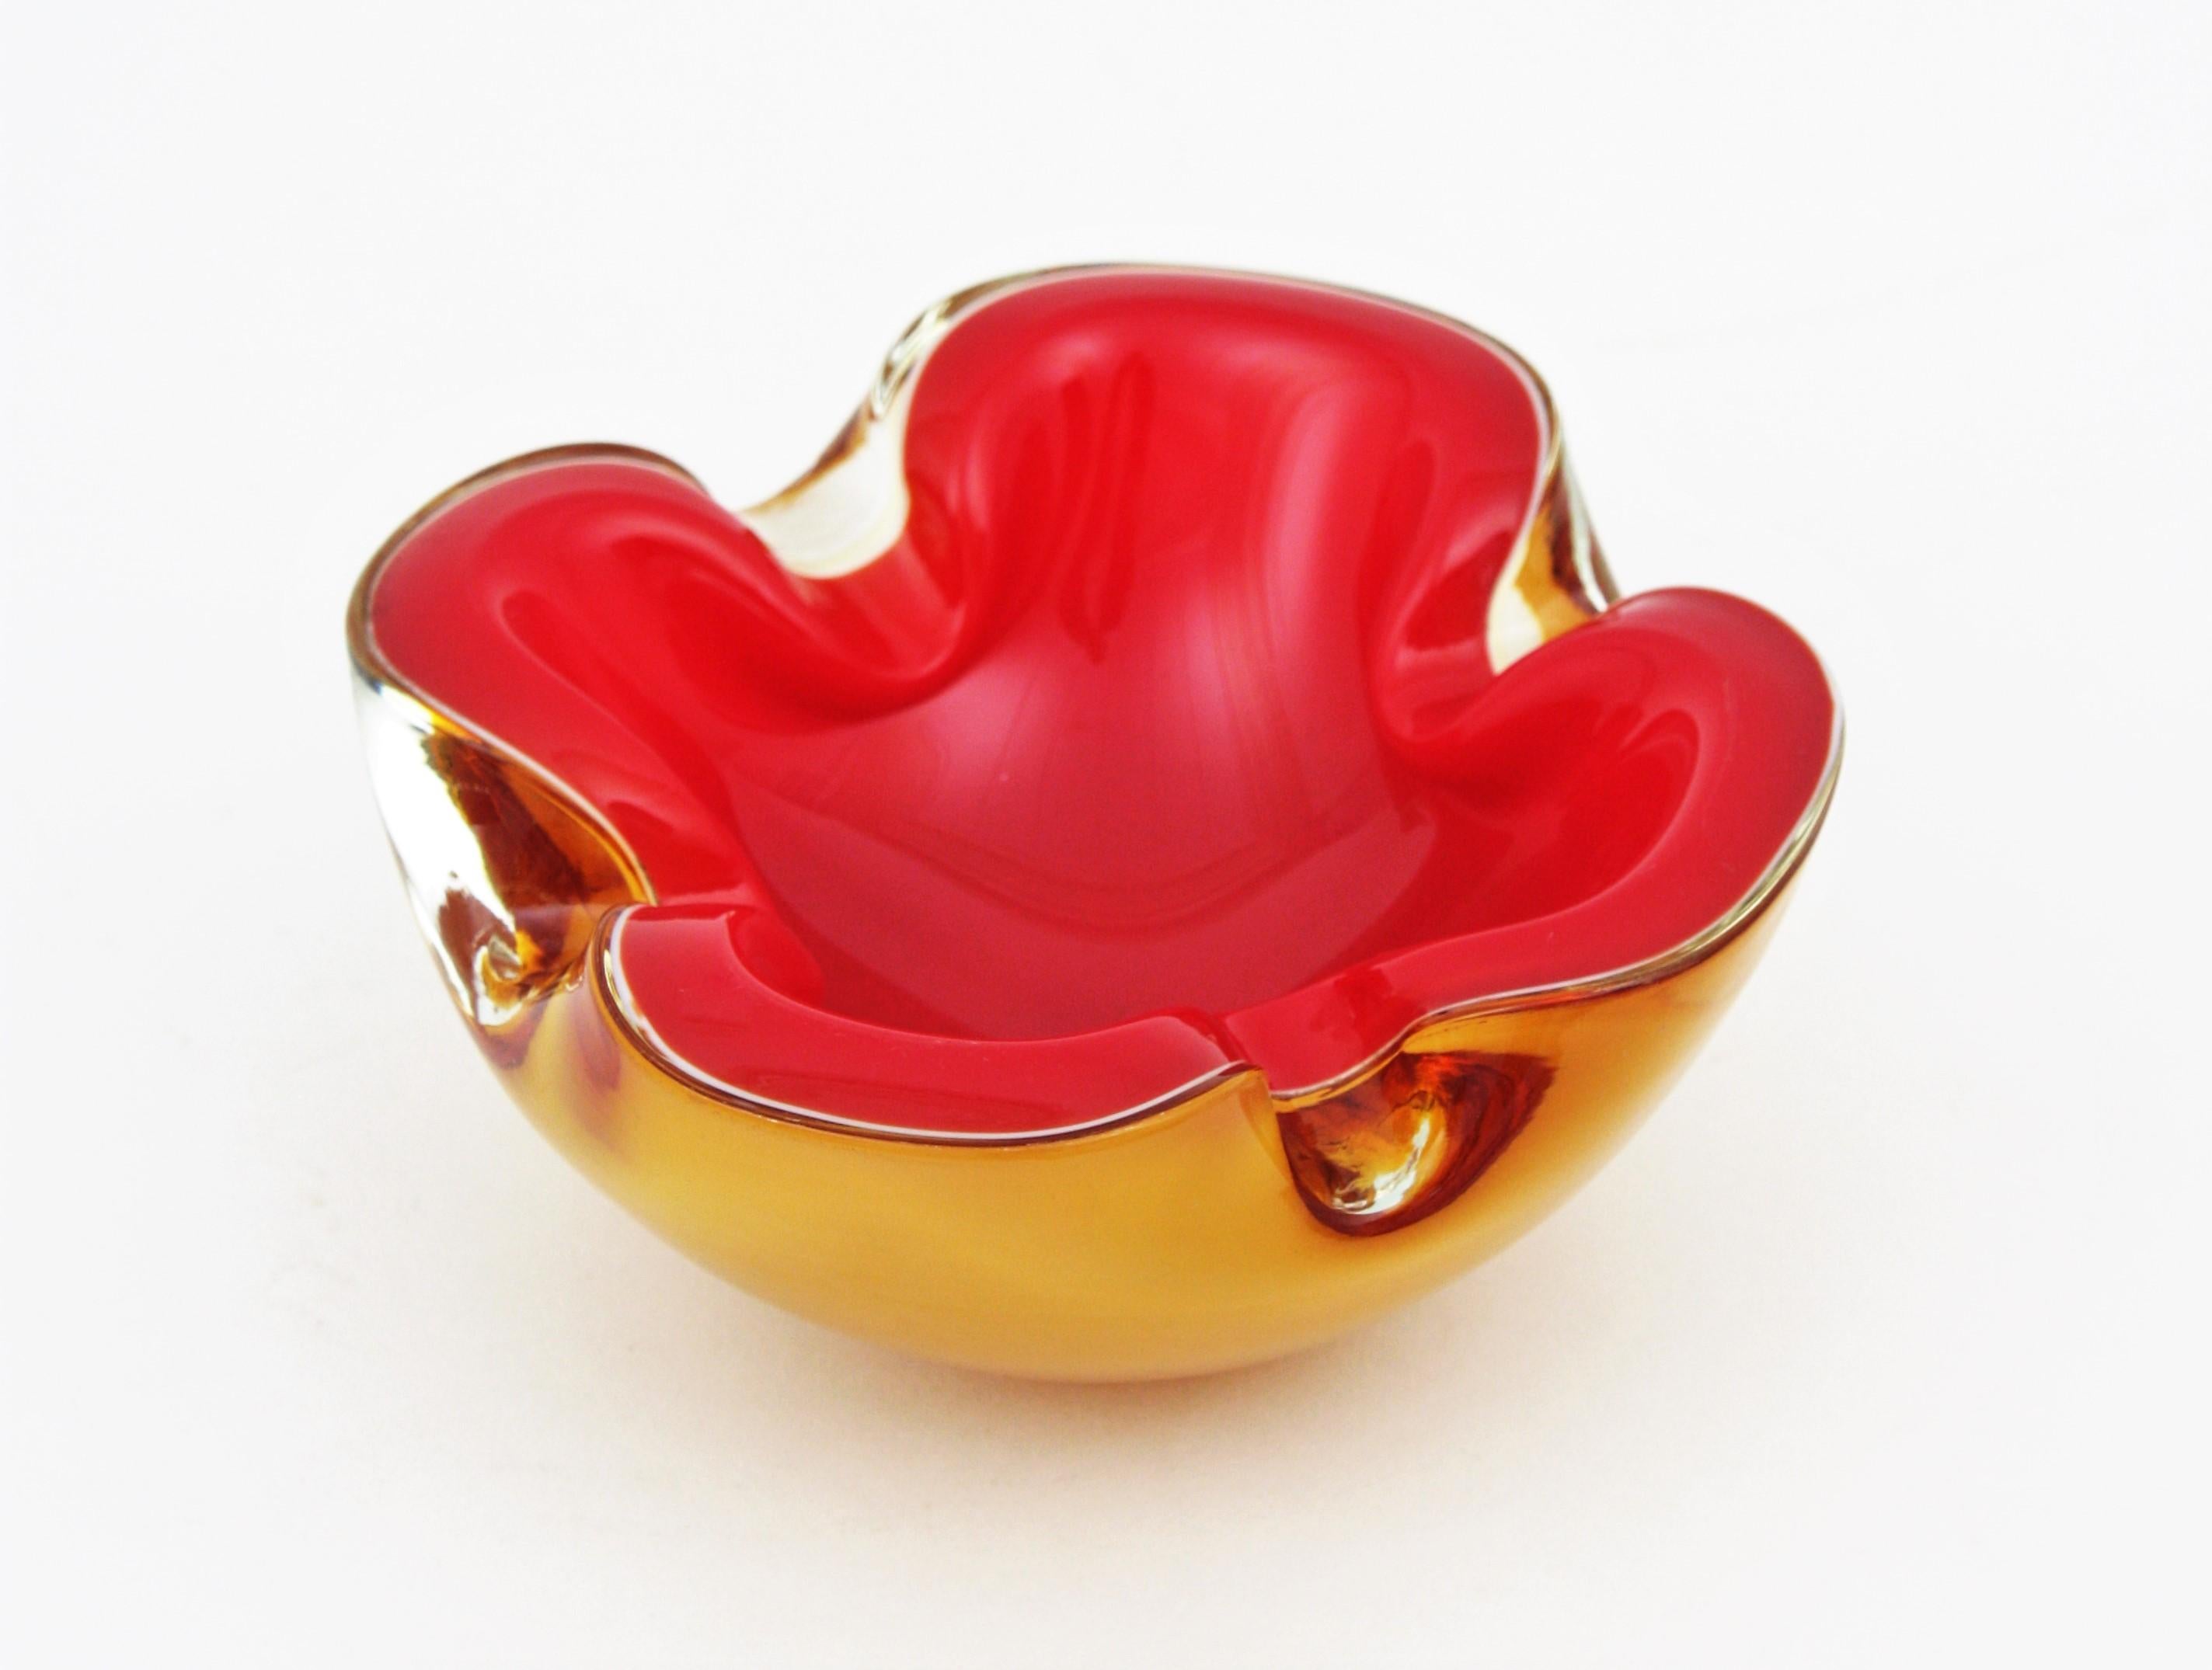 Mid-Century Modern Italian Red and Amber Sommerso Murano Glass Bowl or Ashtray 1